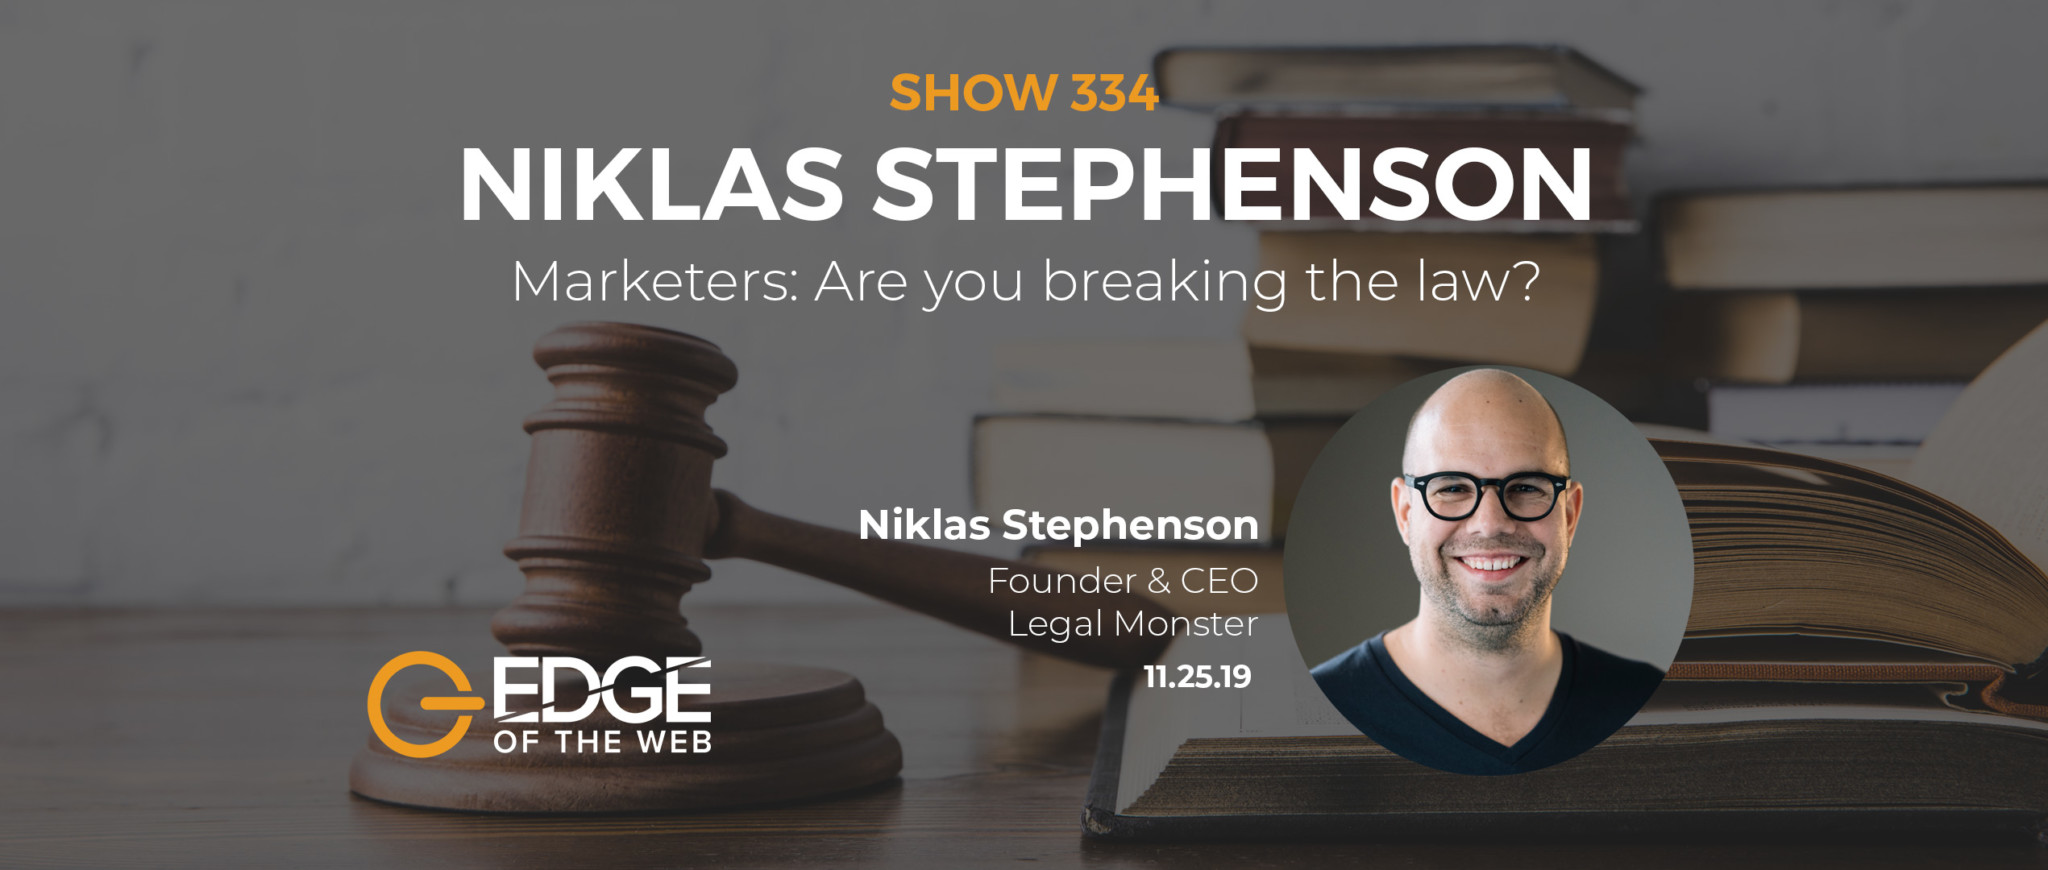 EP 334: Marketers, Are You Breaking The Law? – Interview with Niklas Stephenson